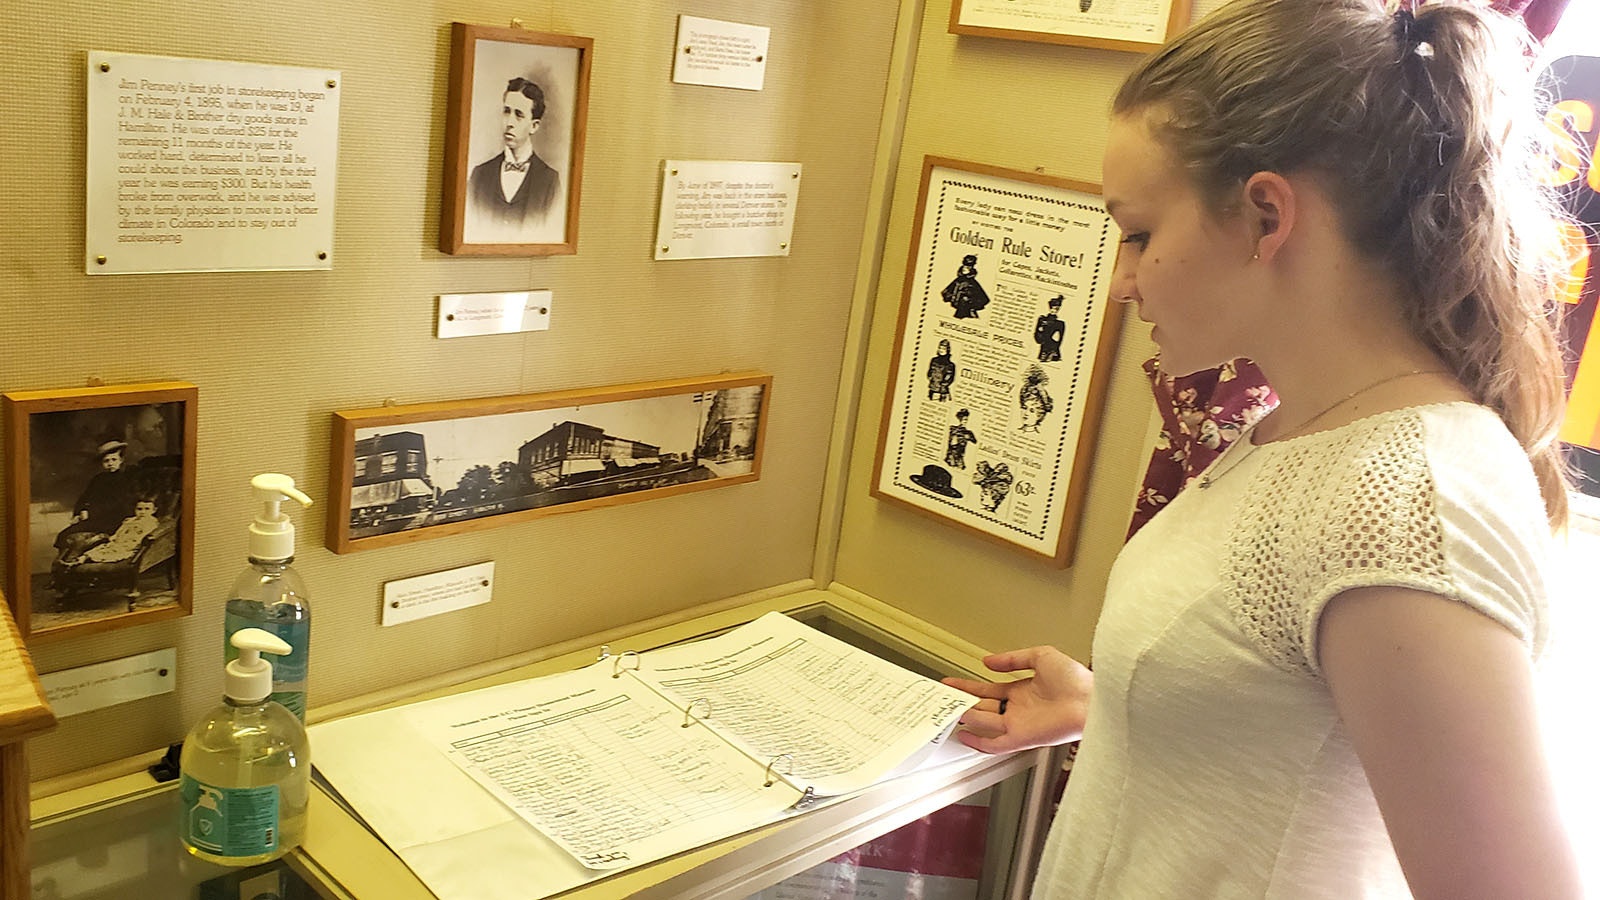 Janelle Sawaya looks at a visitor guest book that shows people coming from all over the world to learn more about James Cash Penney, even one from New Zealand.